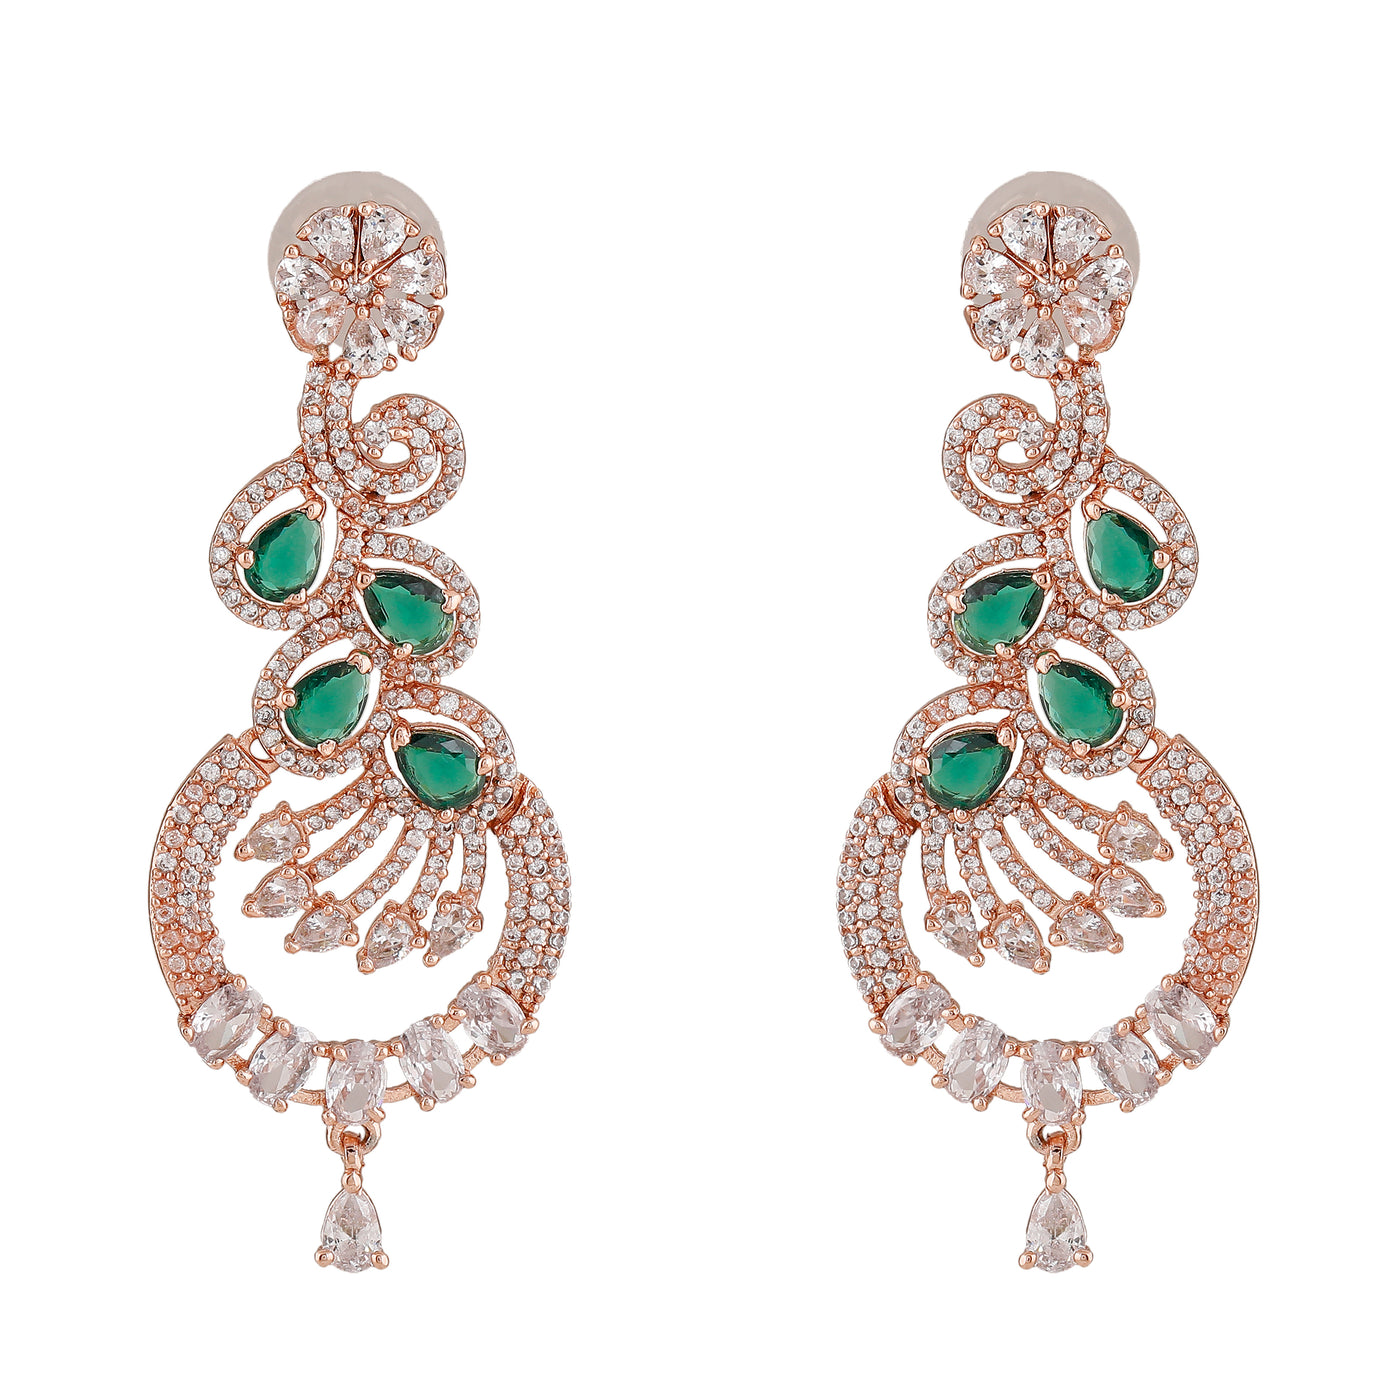 Estele Rose Gold Plated CZ Scintillating Earrings with Emerald Crystals for Women